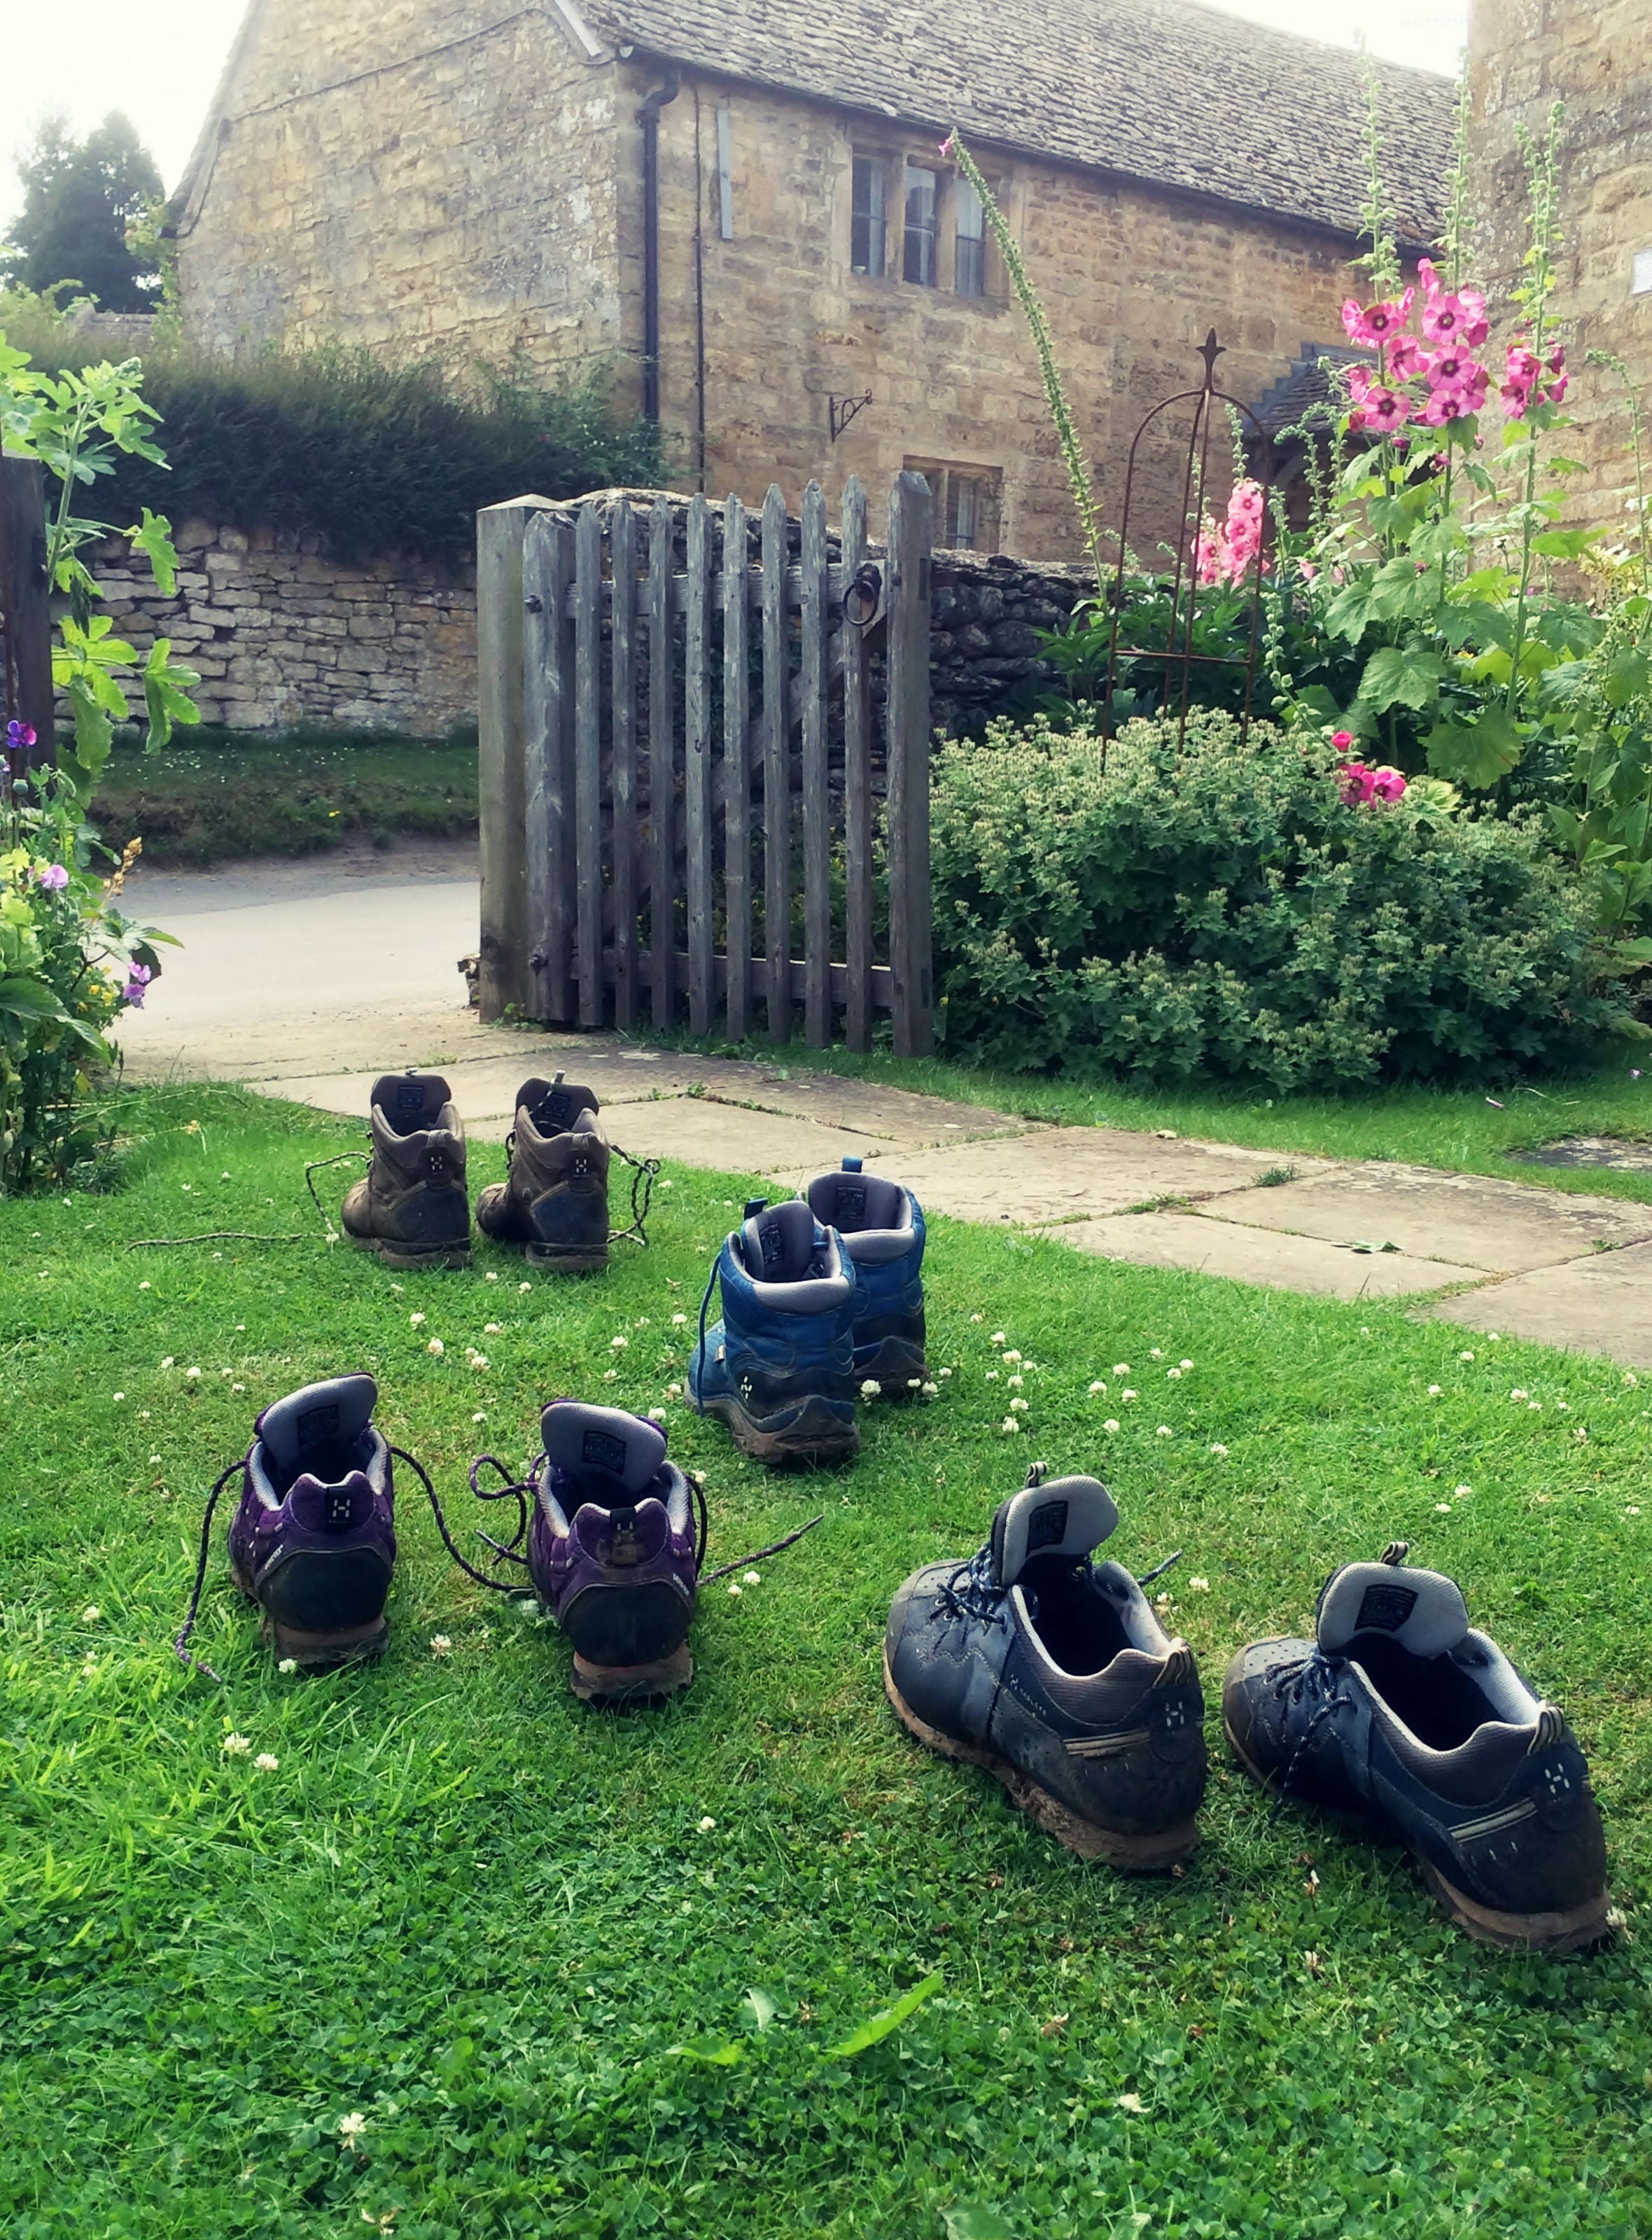 Walking boots sit outside in the garden to dry after a walk.